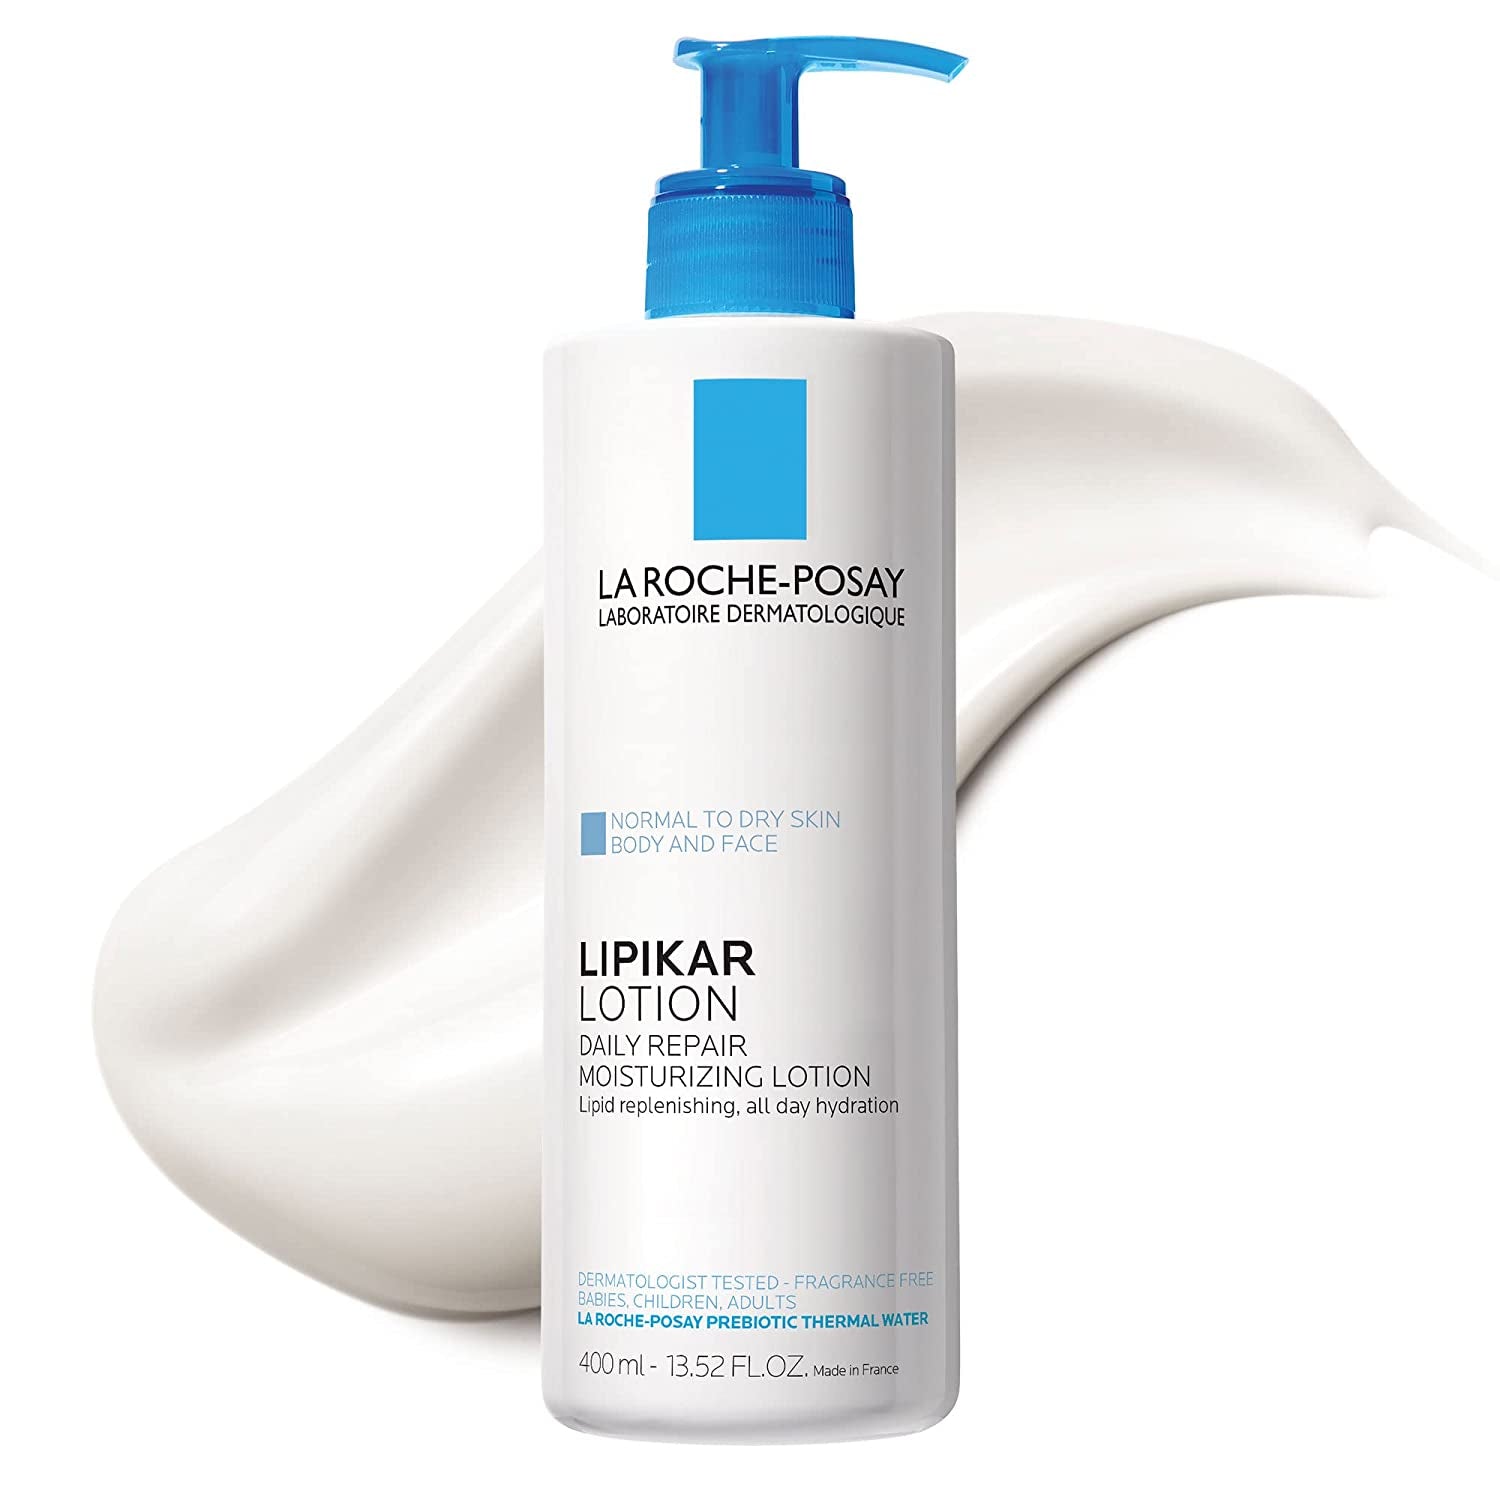 La Roche-Posay Lipikar Daily Repair Moisturizing Cream, Fragrance Free Body Moisturizer with Shea Butter, Body Lotion for Dry Skin, Moisturizing for Sensitive Skin - Free & Fast Delivery